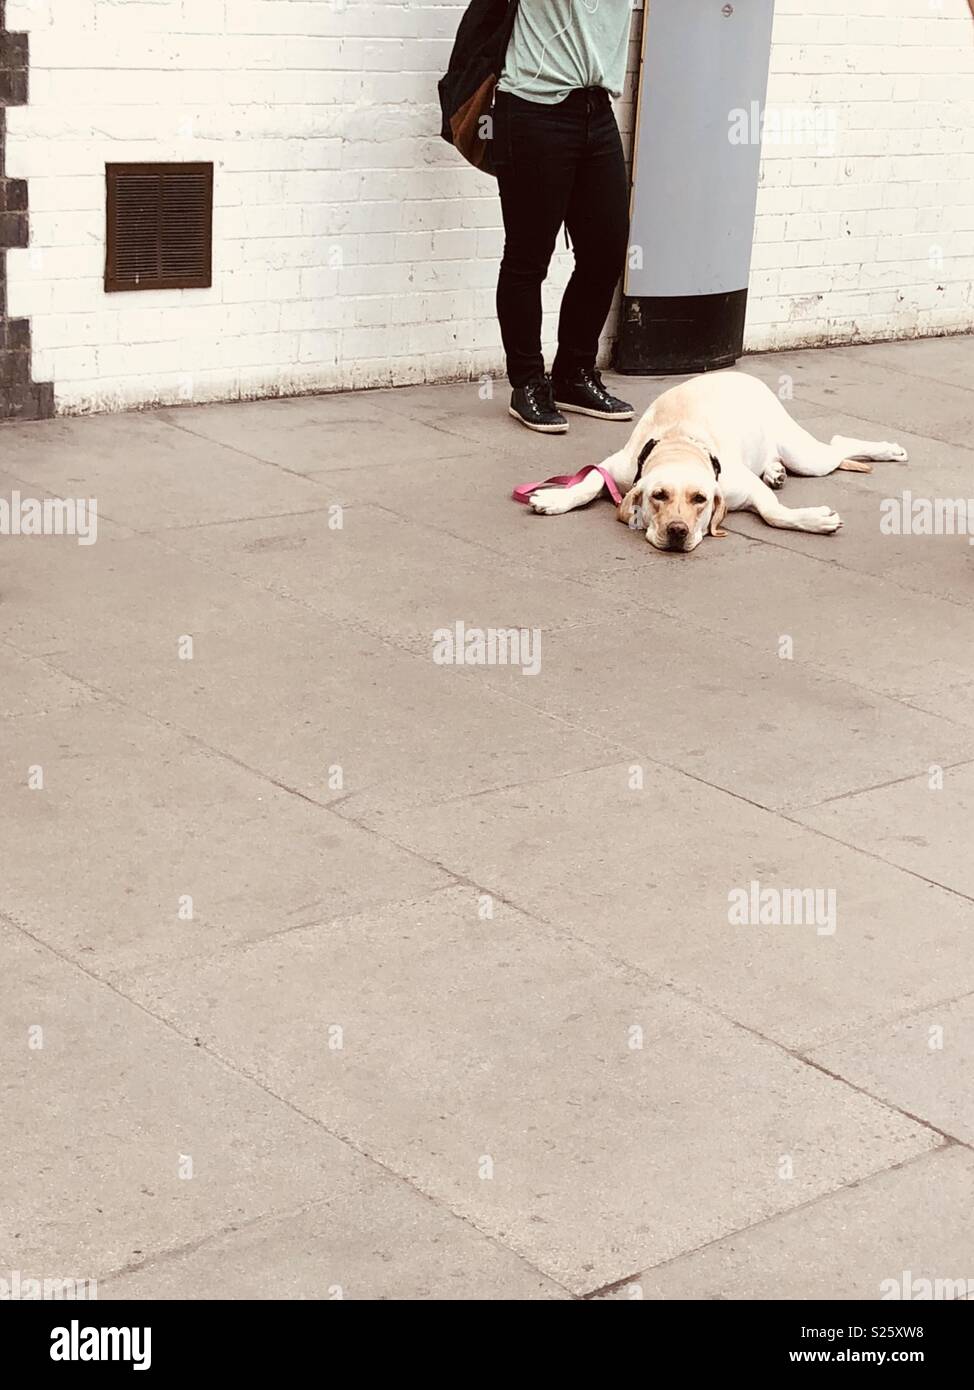 Depressed dog laying down on the pavement Stock Photo